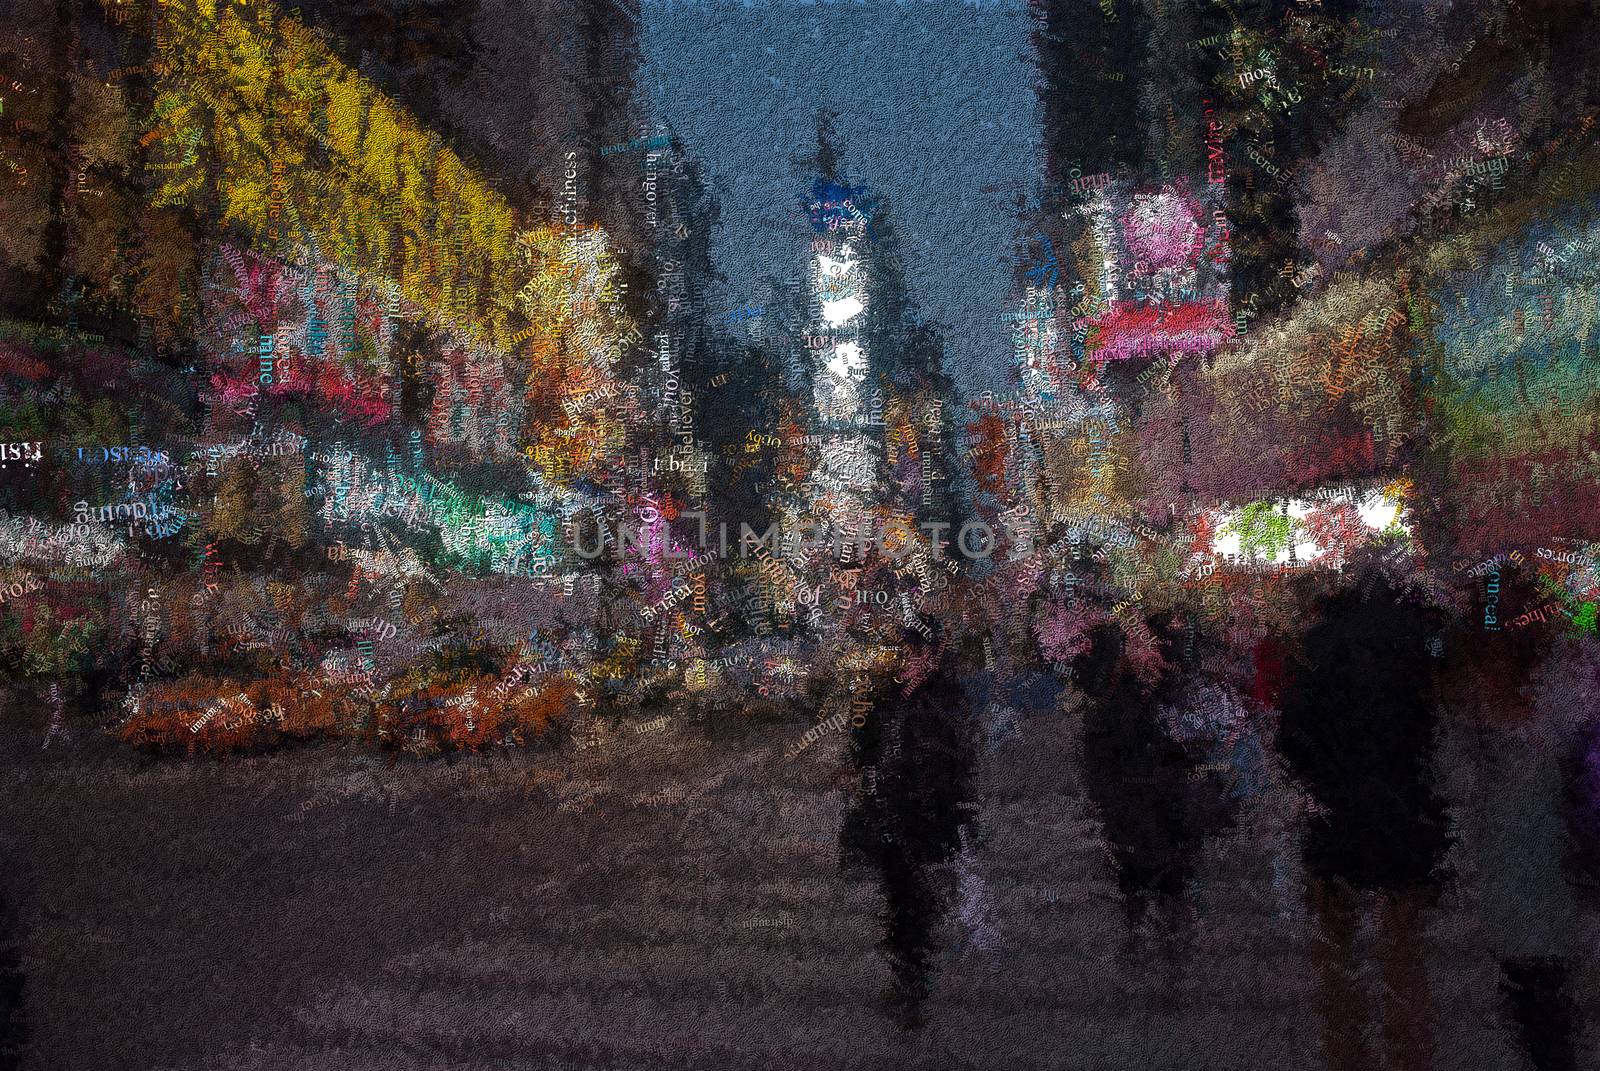 Time square by applesstock